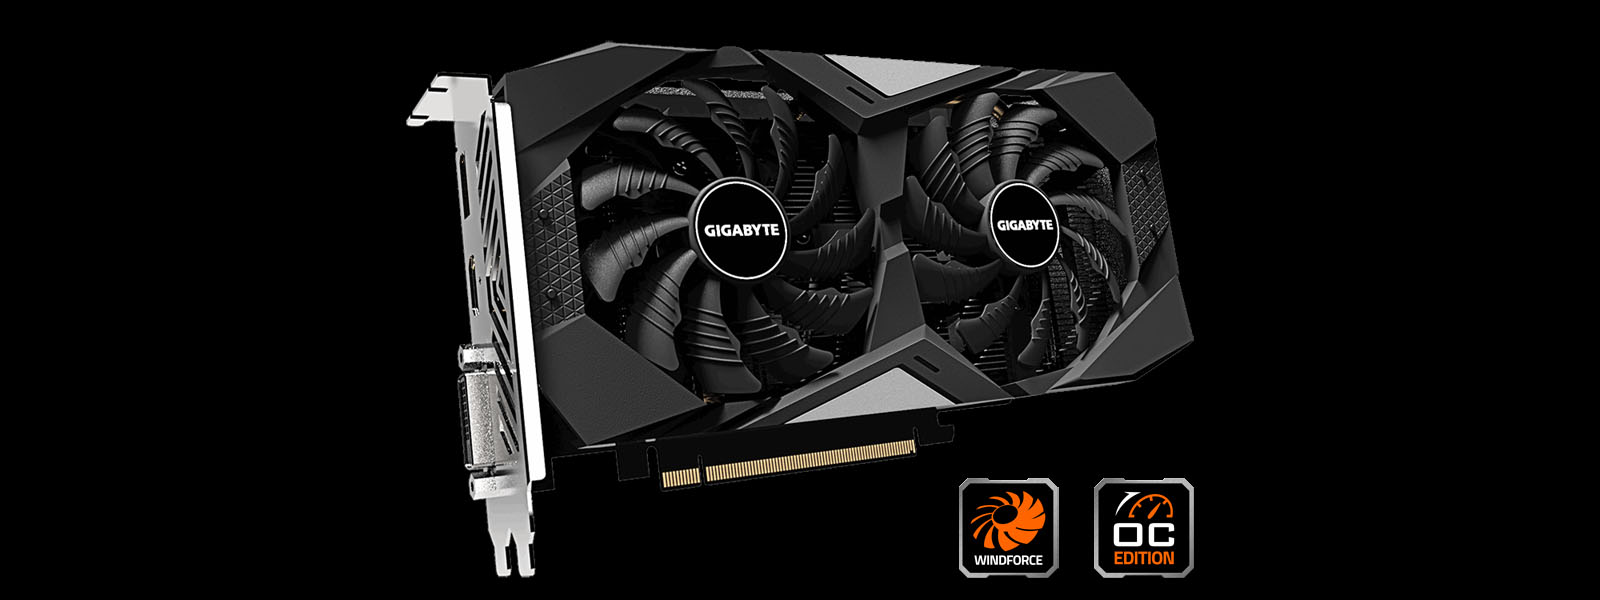 GIGABYTE GeForce GTX 1650 SUPER WINDFORCE OC 4G front look with OC Edition and WINDFORCE logos